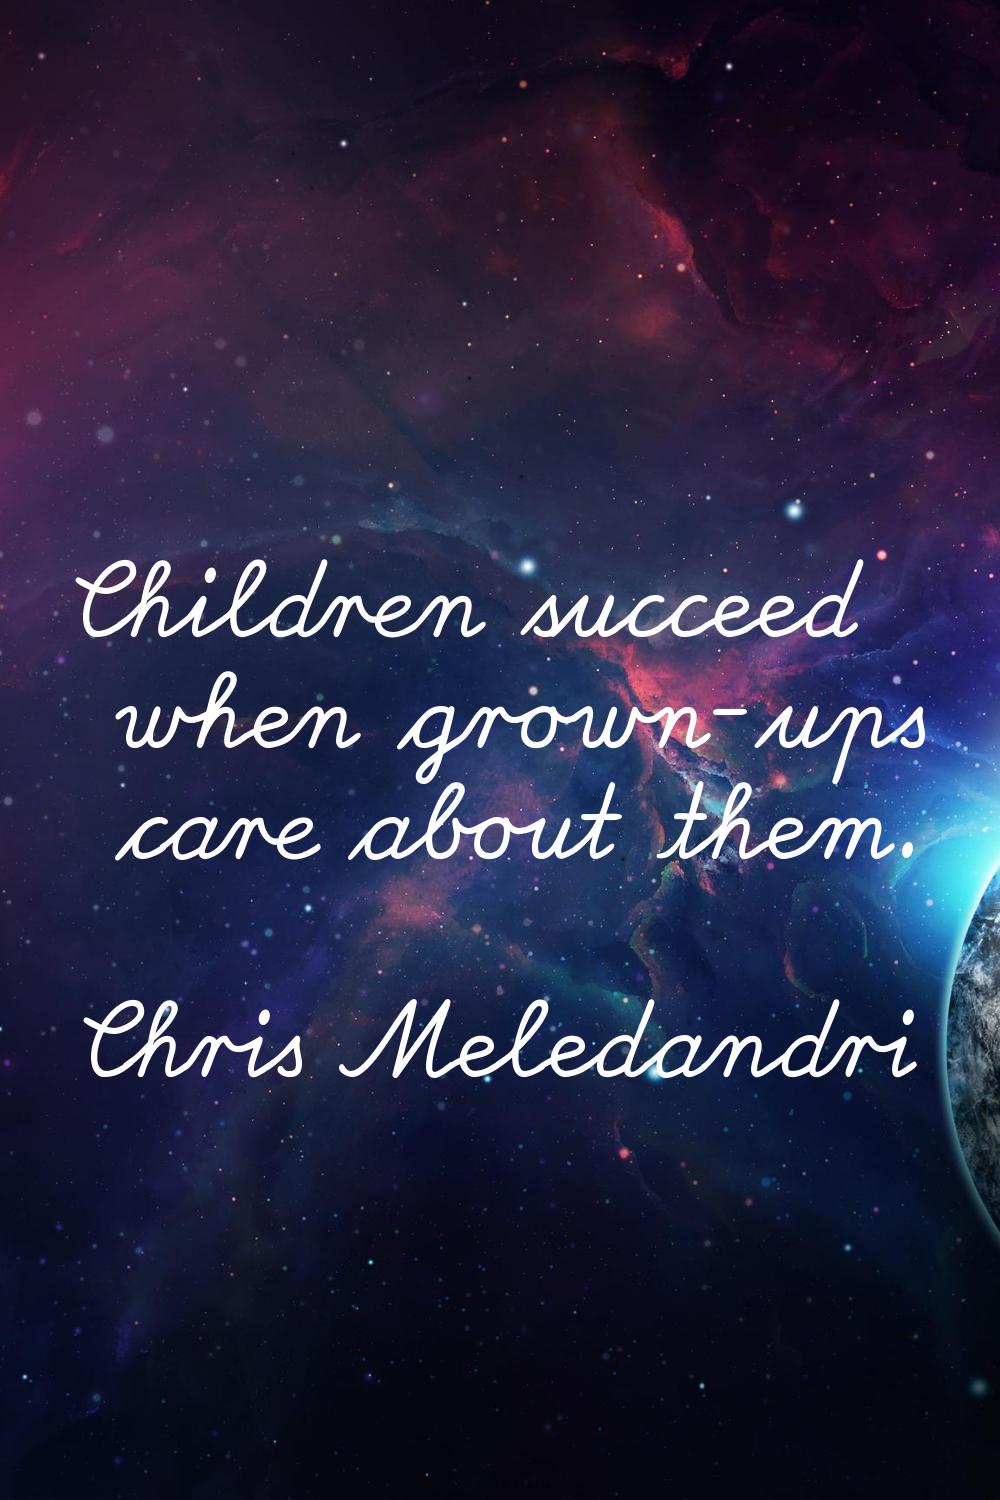 Children succeed when grown-ups care about them.